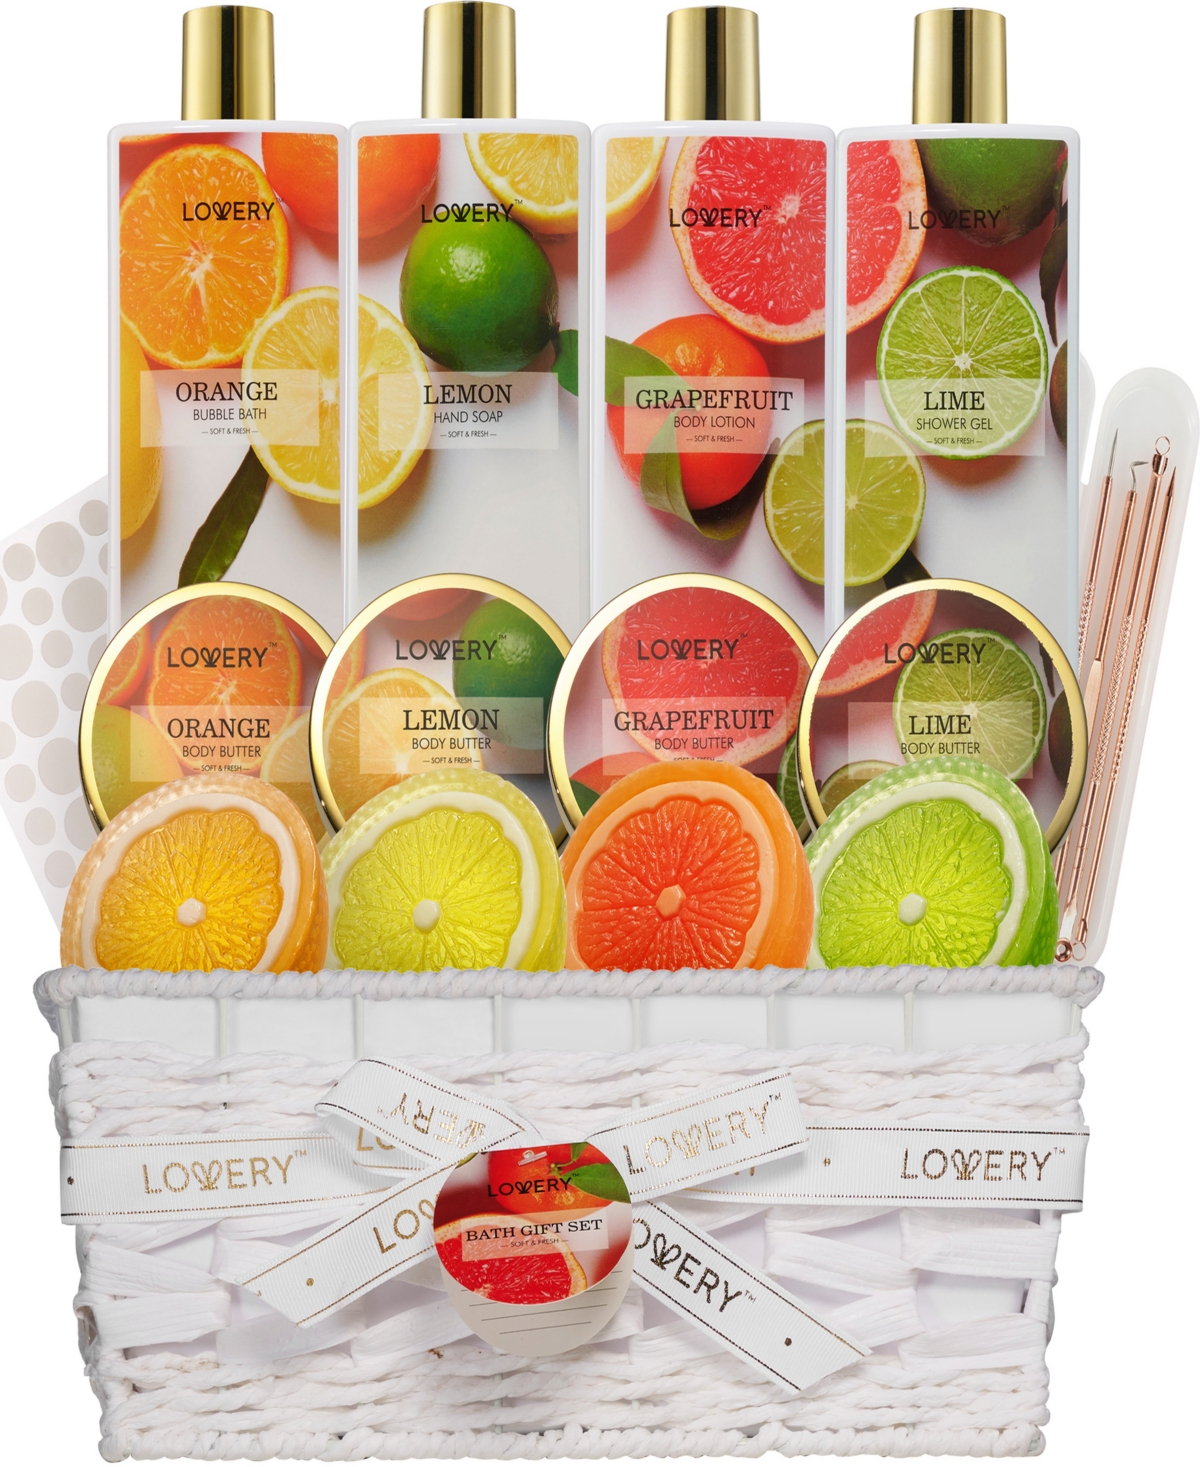 Lovery Bath and Body Care Gift Set, Home Spa Kit in Lemon, Orange, Grapefruit Lime Scents, Relaxing Stress Relief Gift, 19 Piece